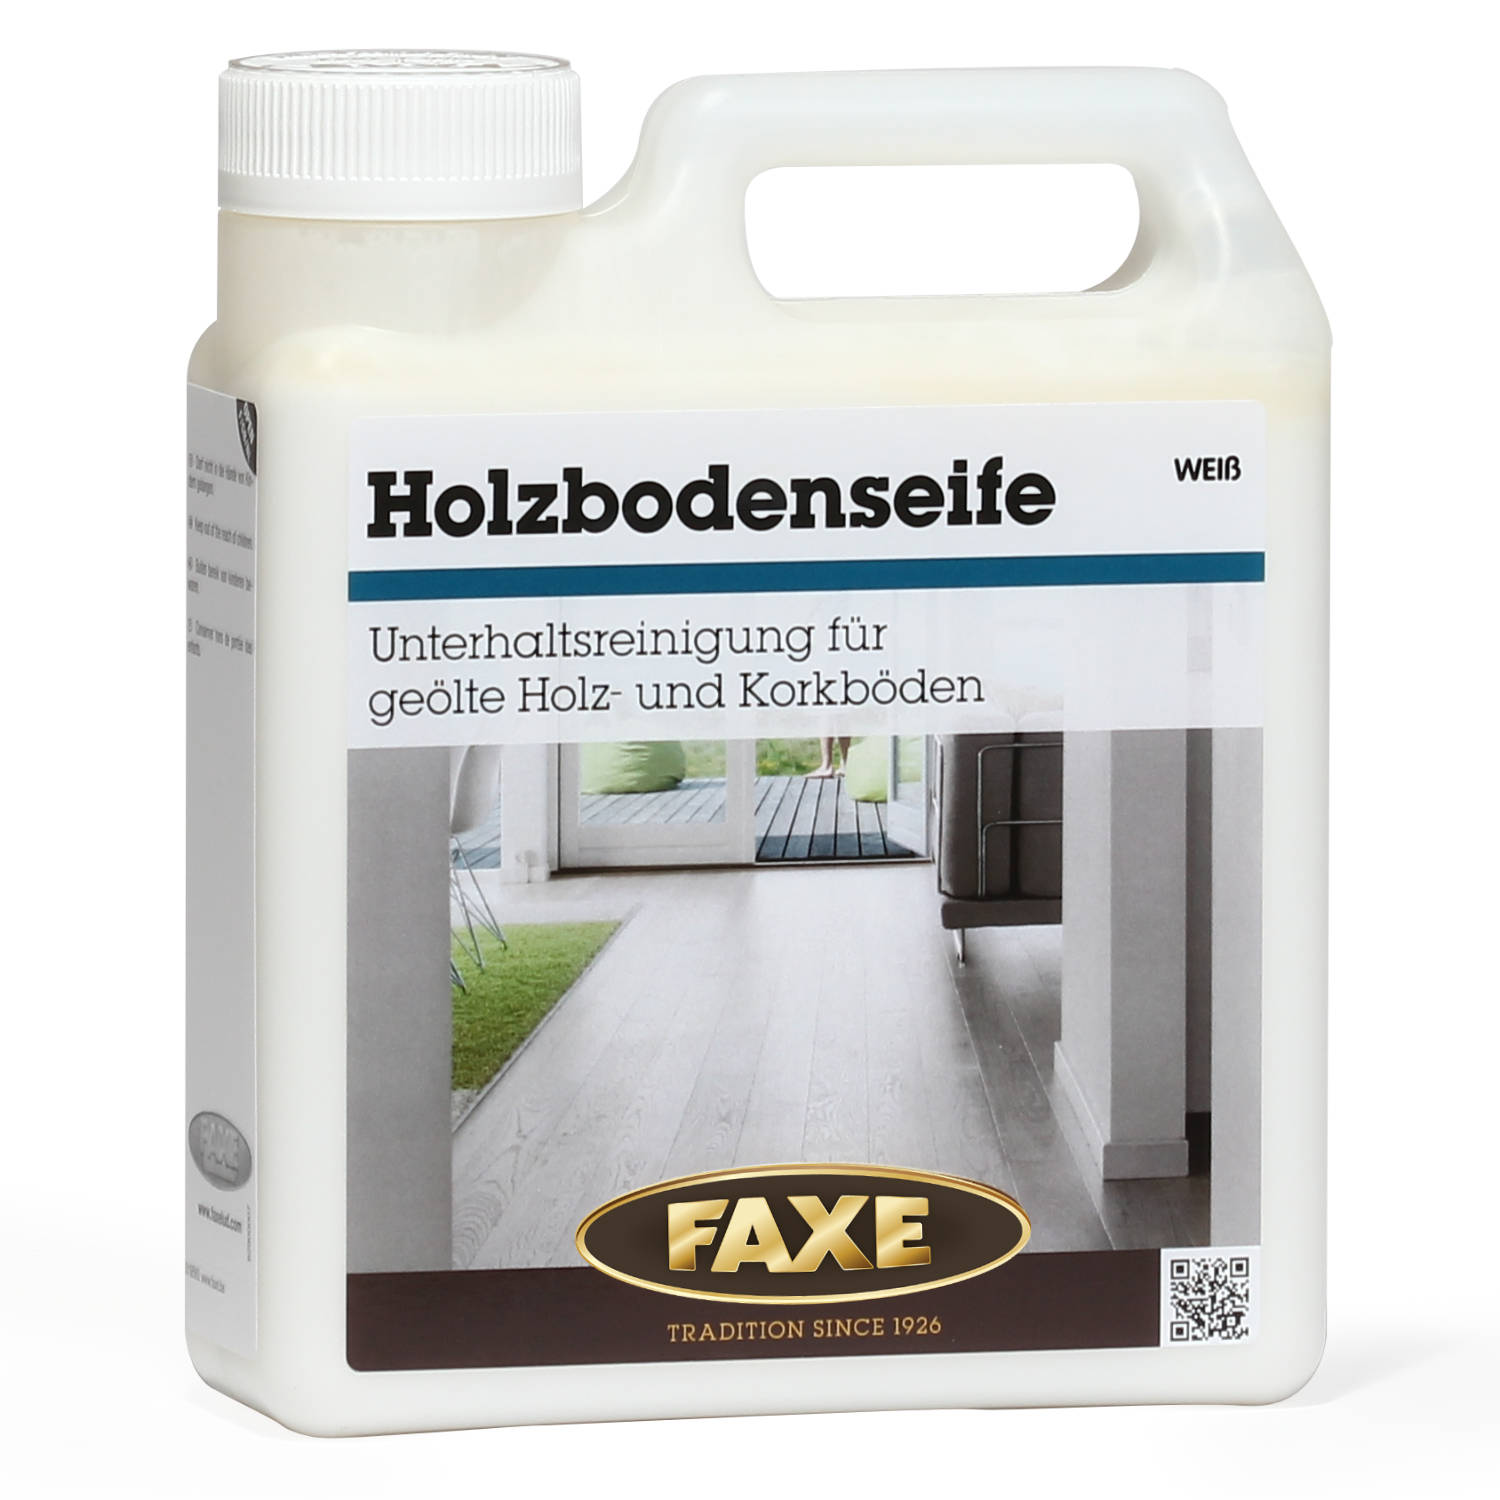 Faxe Holzbodenseife weiß